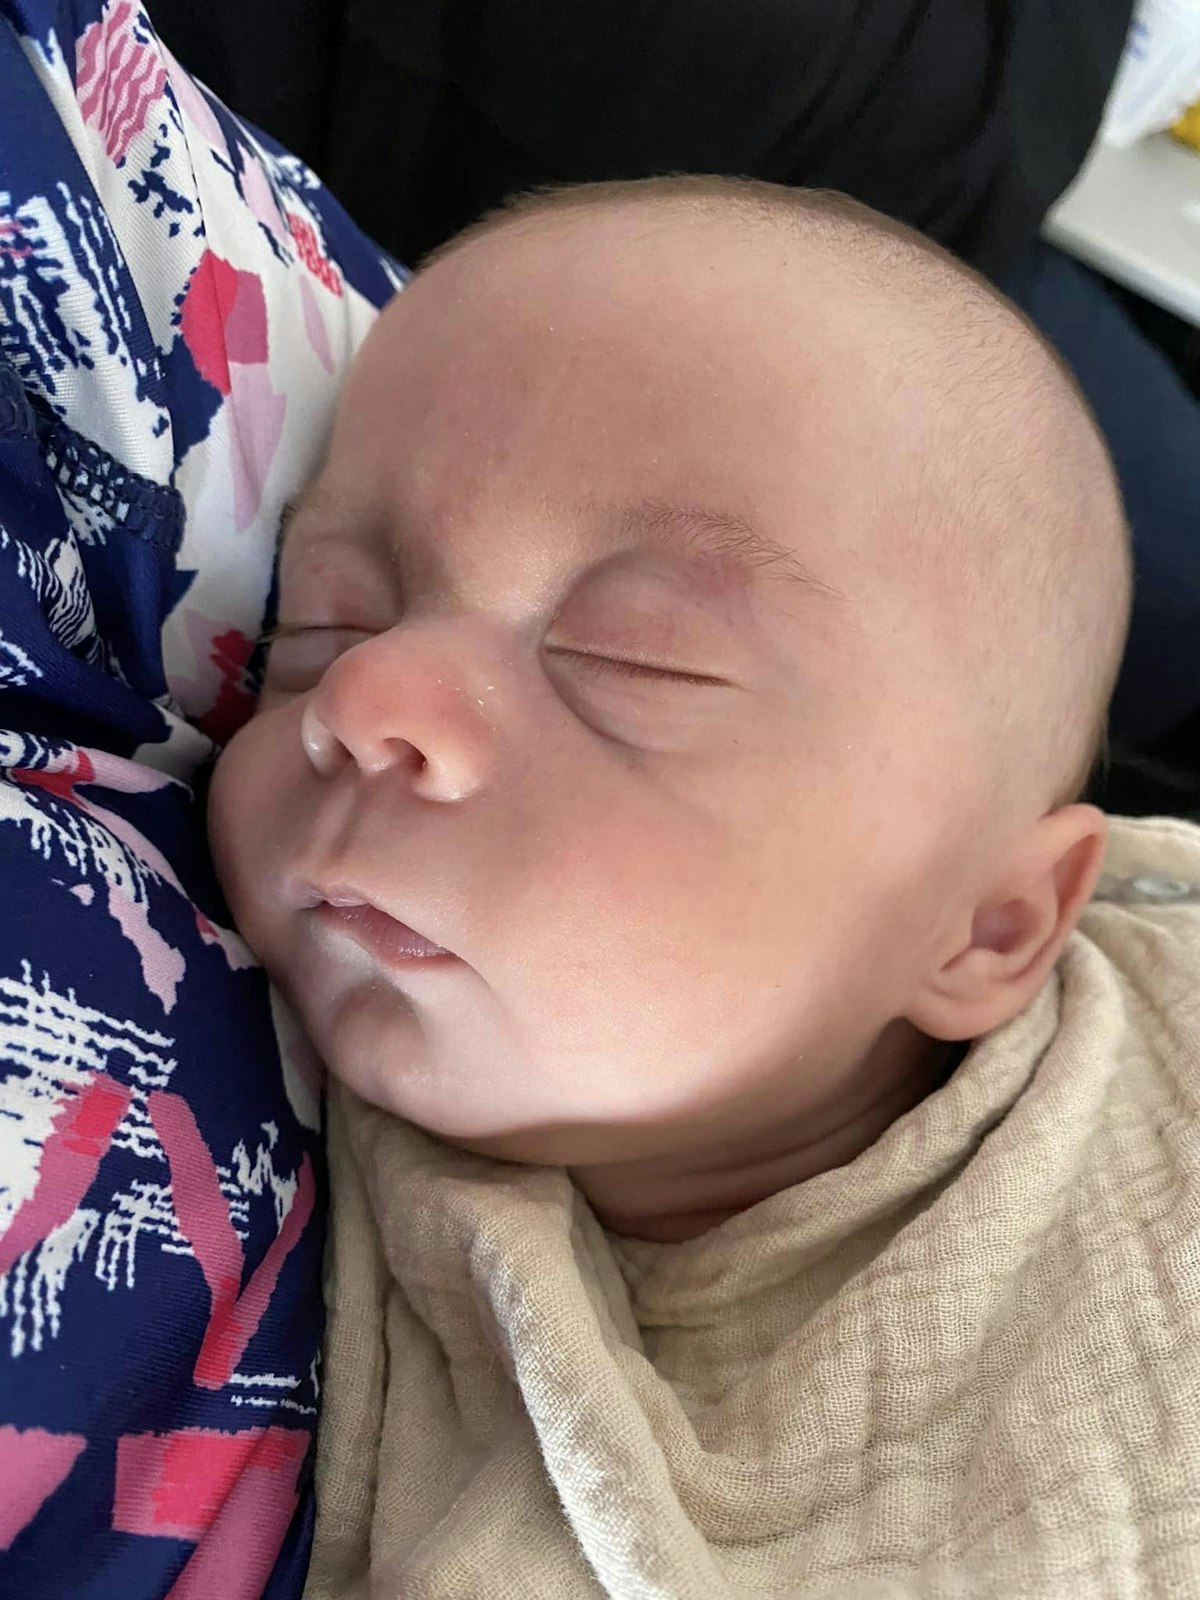 As Teddy grew, Katy Conners posted regular updates and ultrasounds to send to friends, family and well-wishers from the hospital. "My goal in the hospital was to live each day with joy," Conners said.